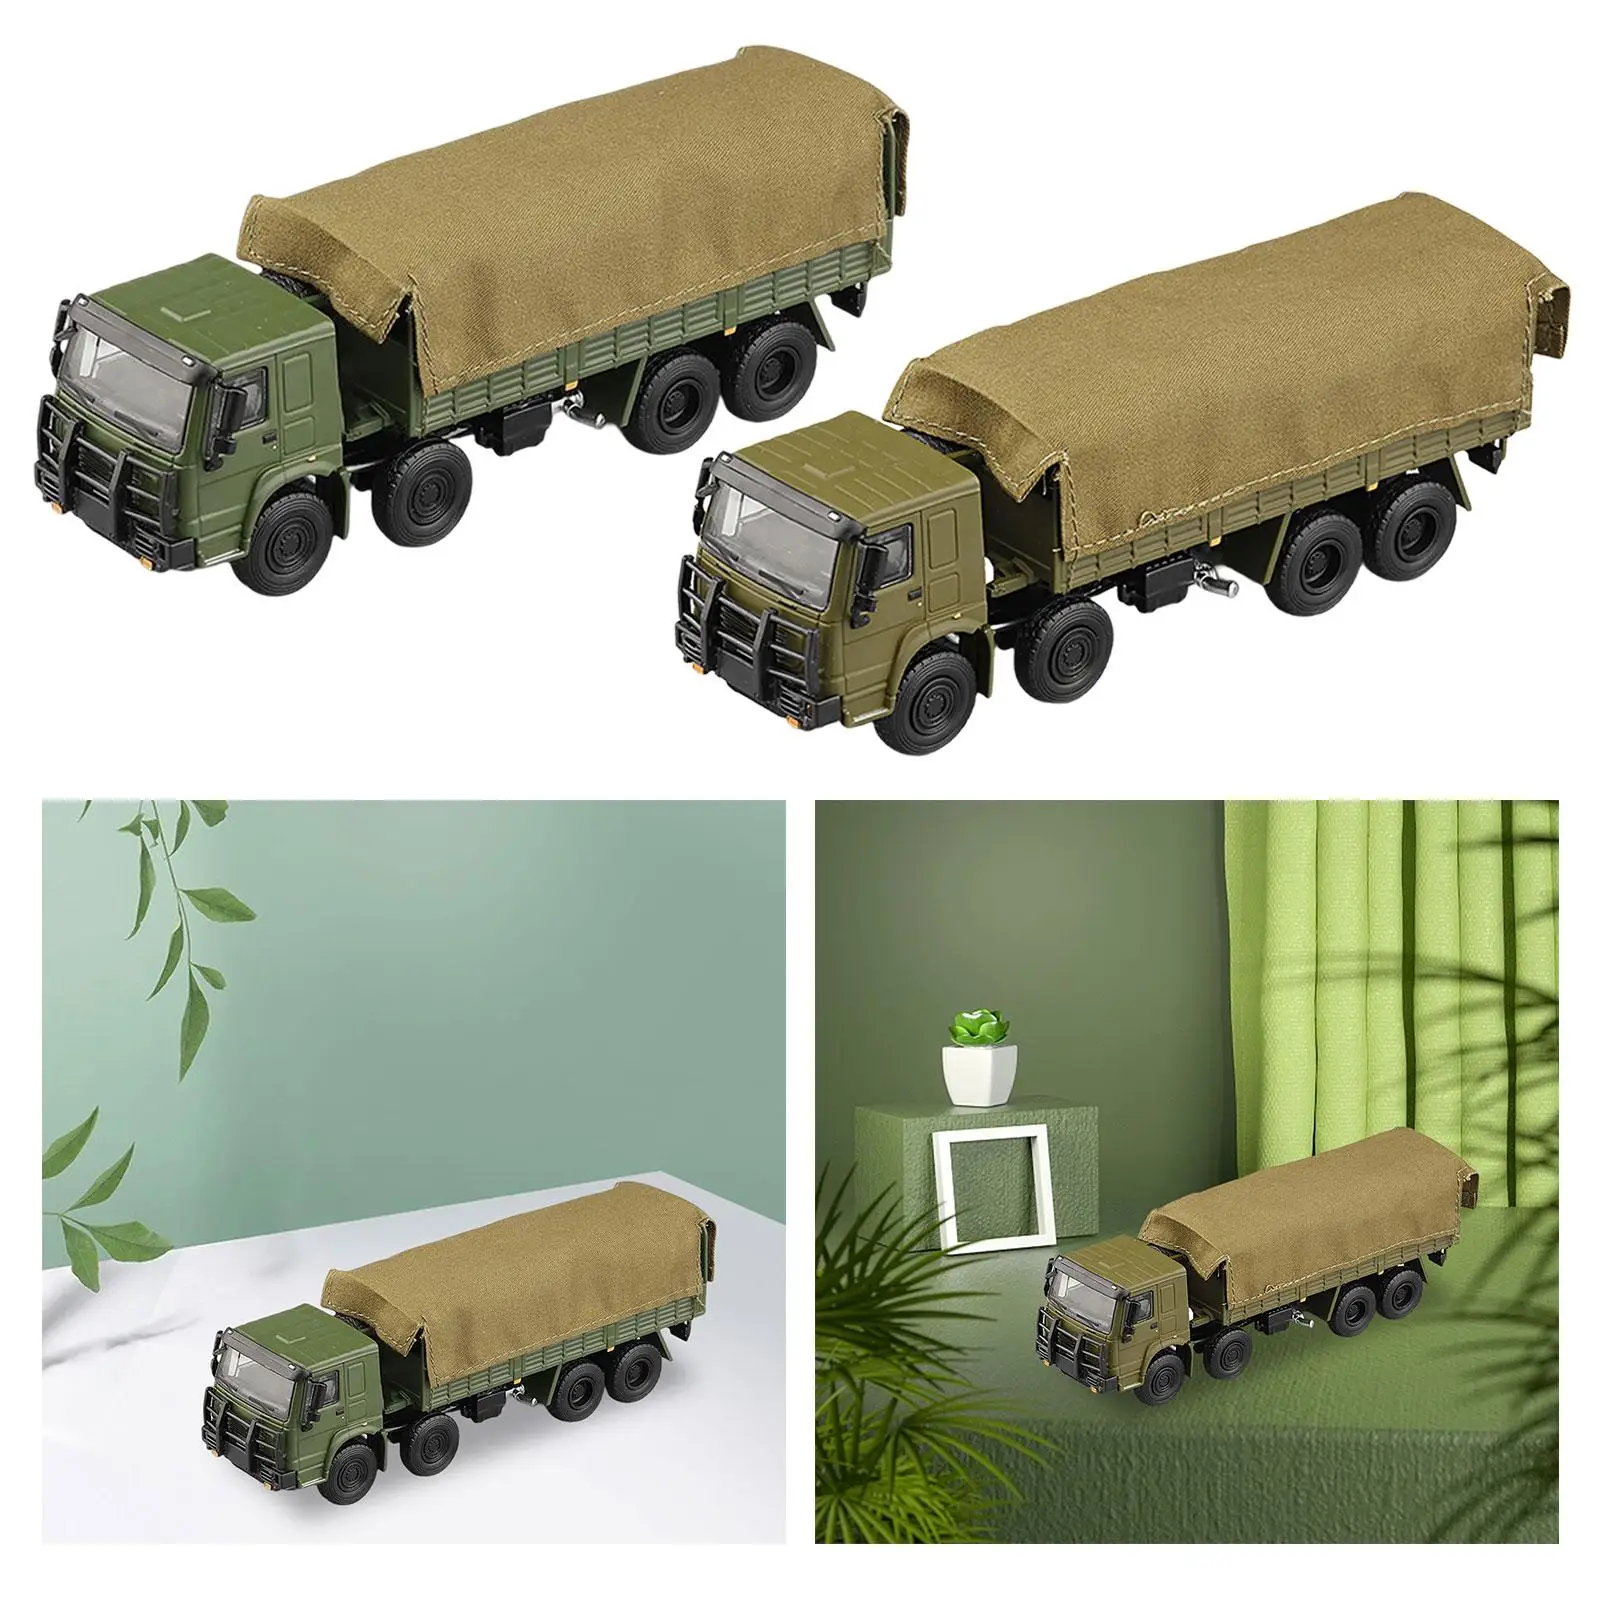 1:64 Diorama Street Car Model Sand Table Ornament Alloy Classic Car Model Collection for DIY Scene Photography Props Accessories